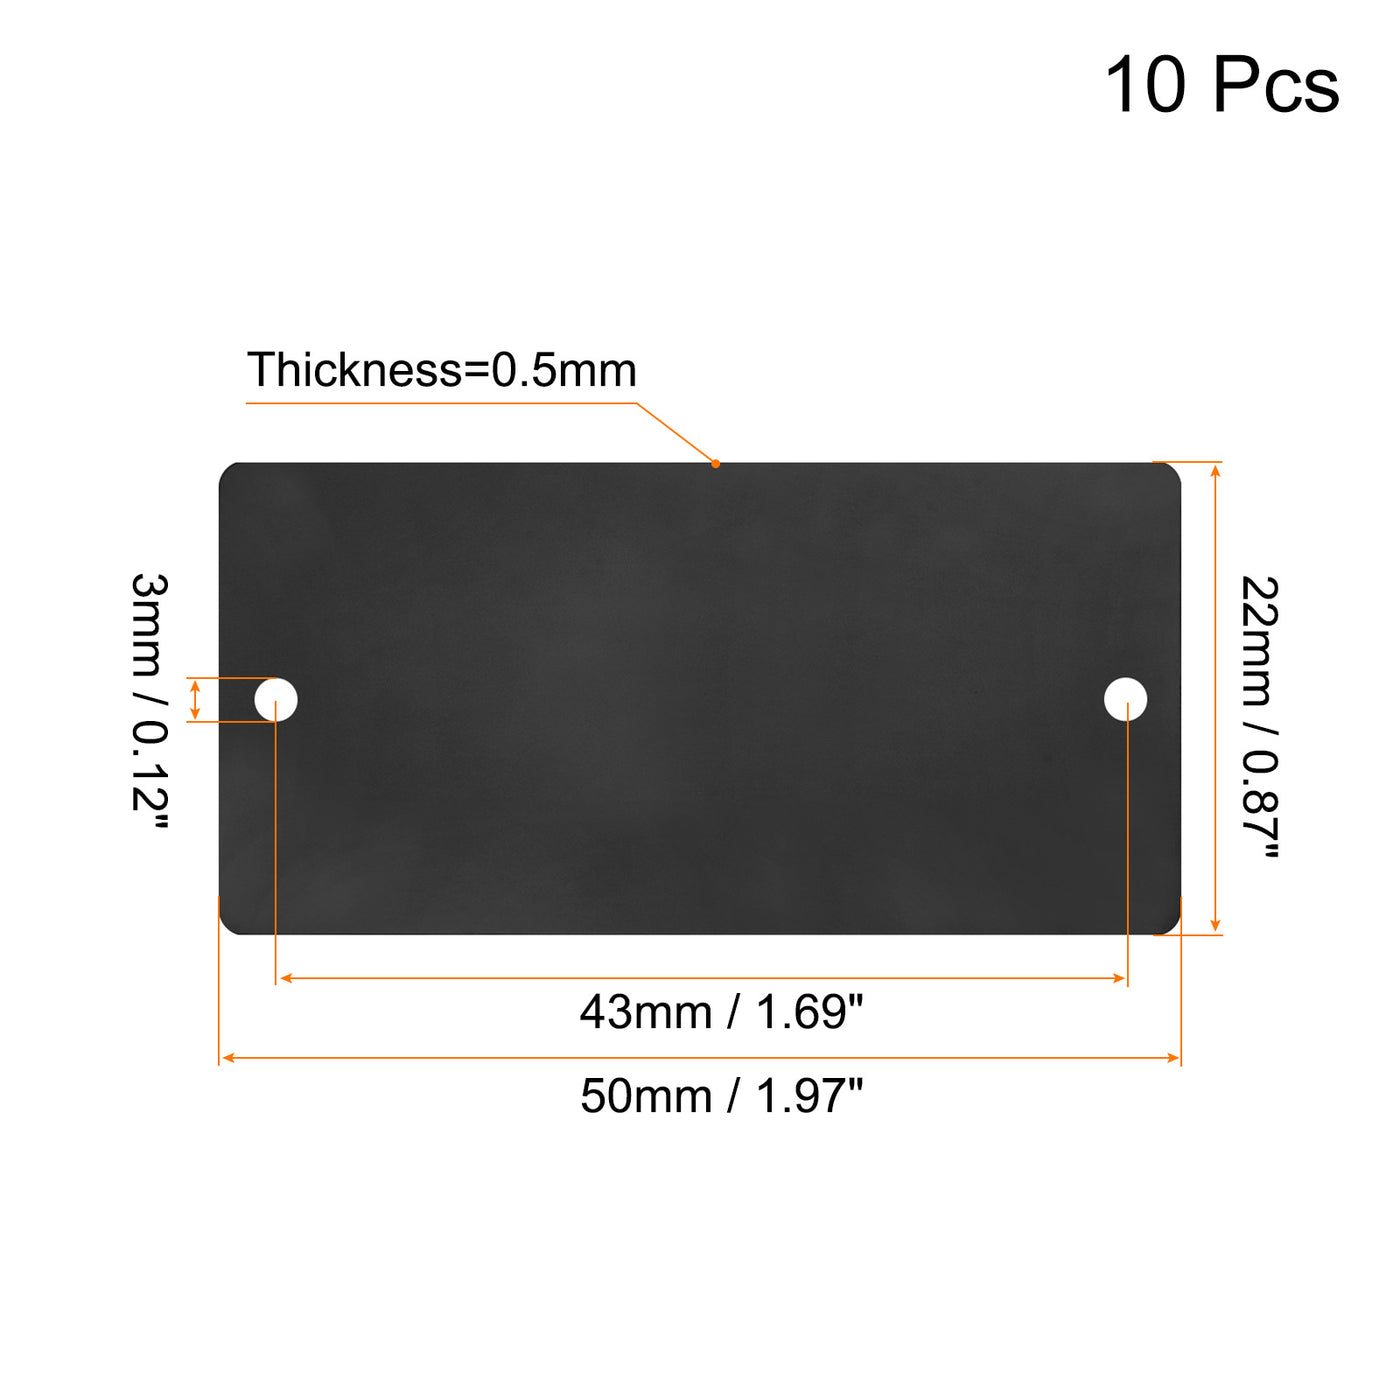 uxcell Uxcell 50x22x0.5mm Aluminium Blank Tags Engraving Blanks with 2 Hole, 10Pcs (Black)